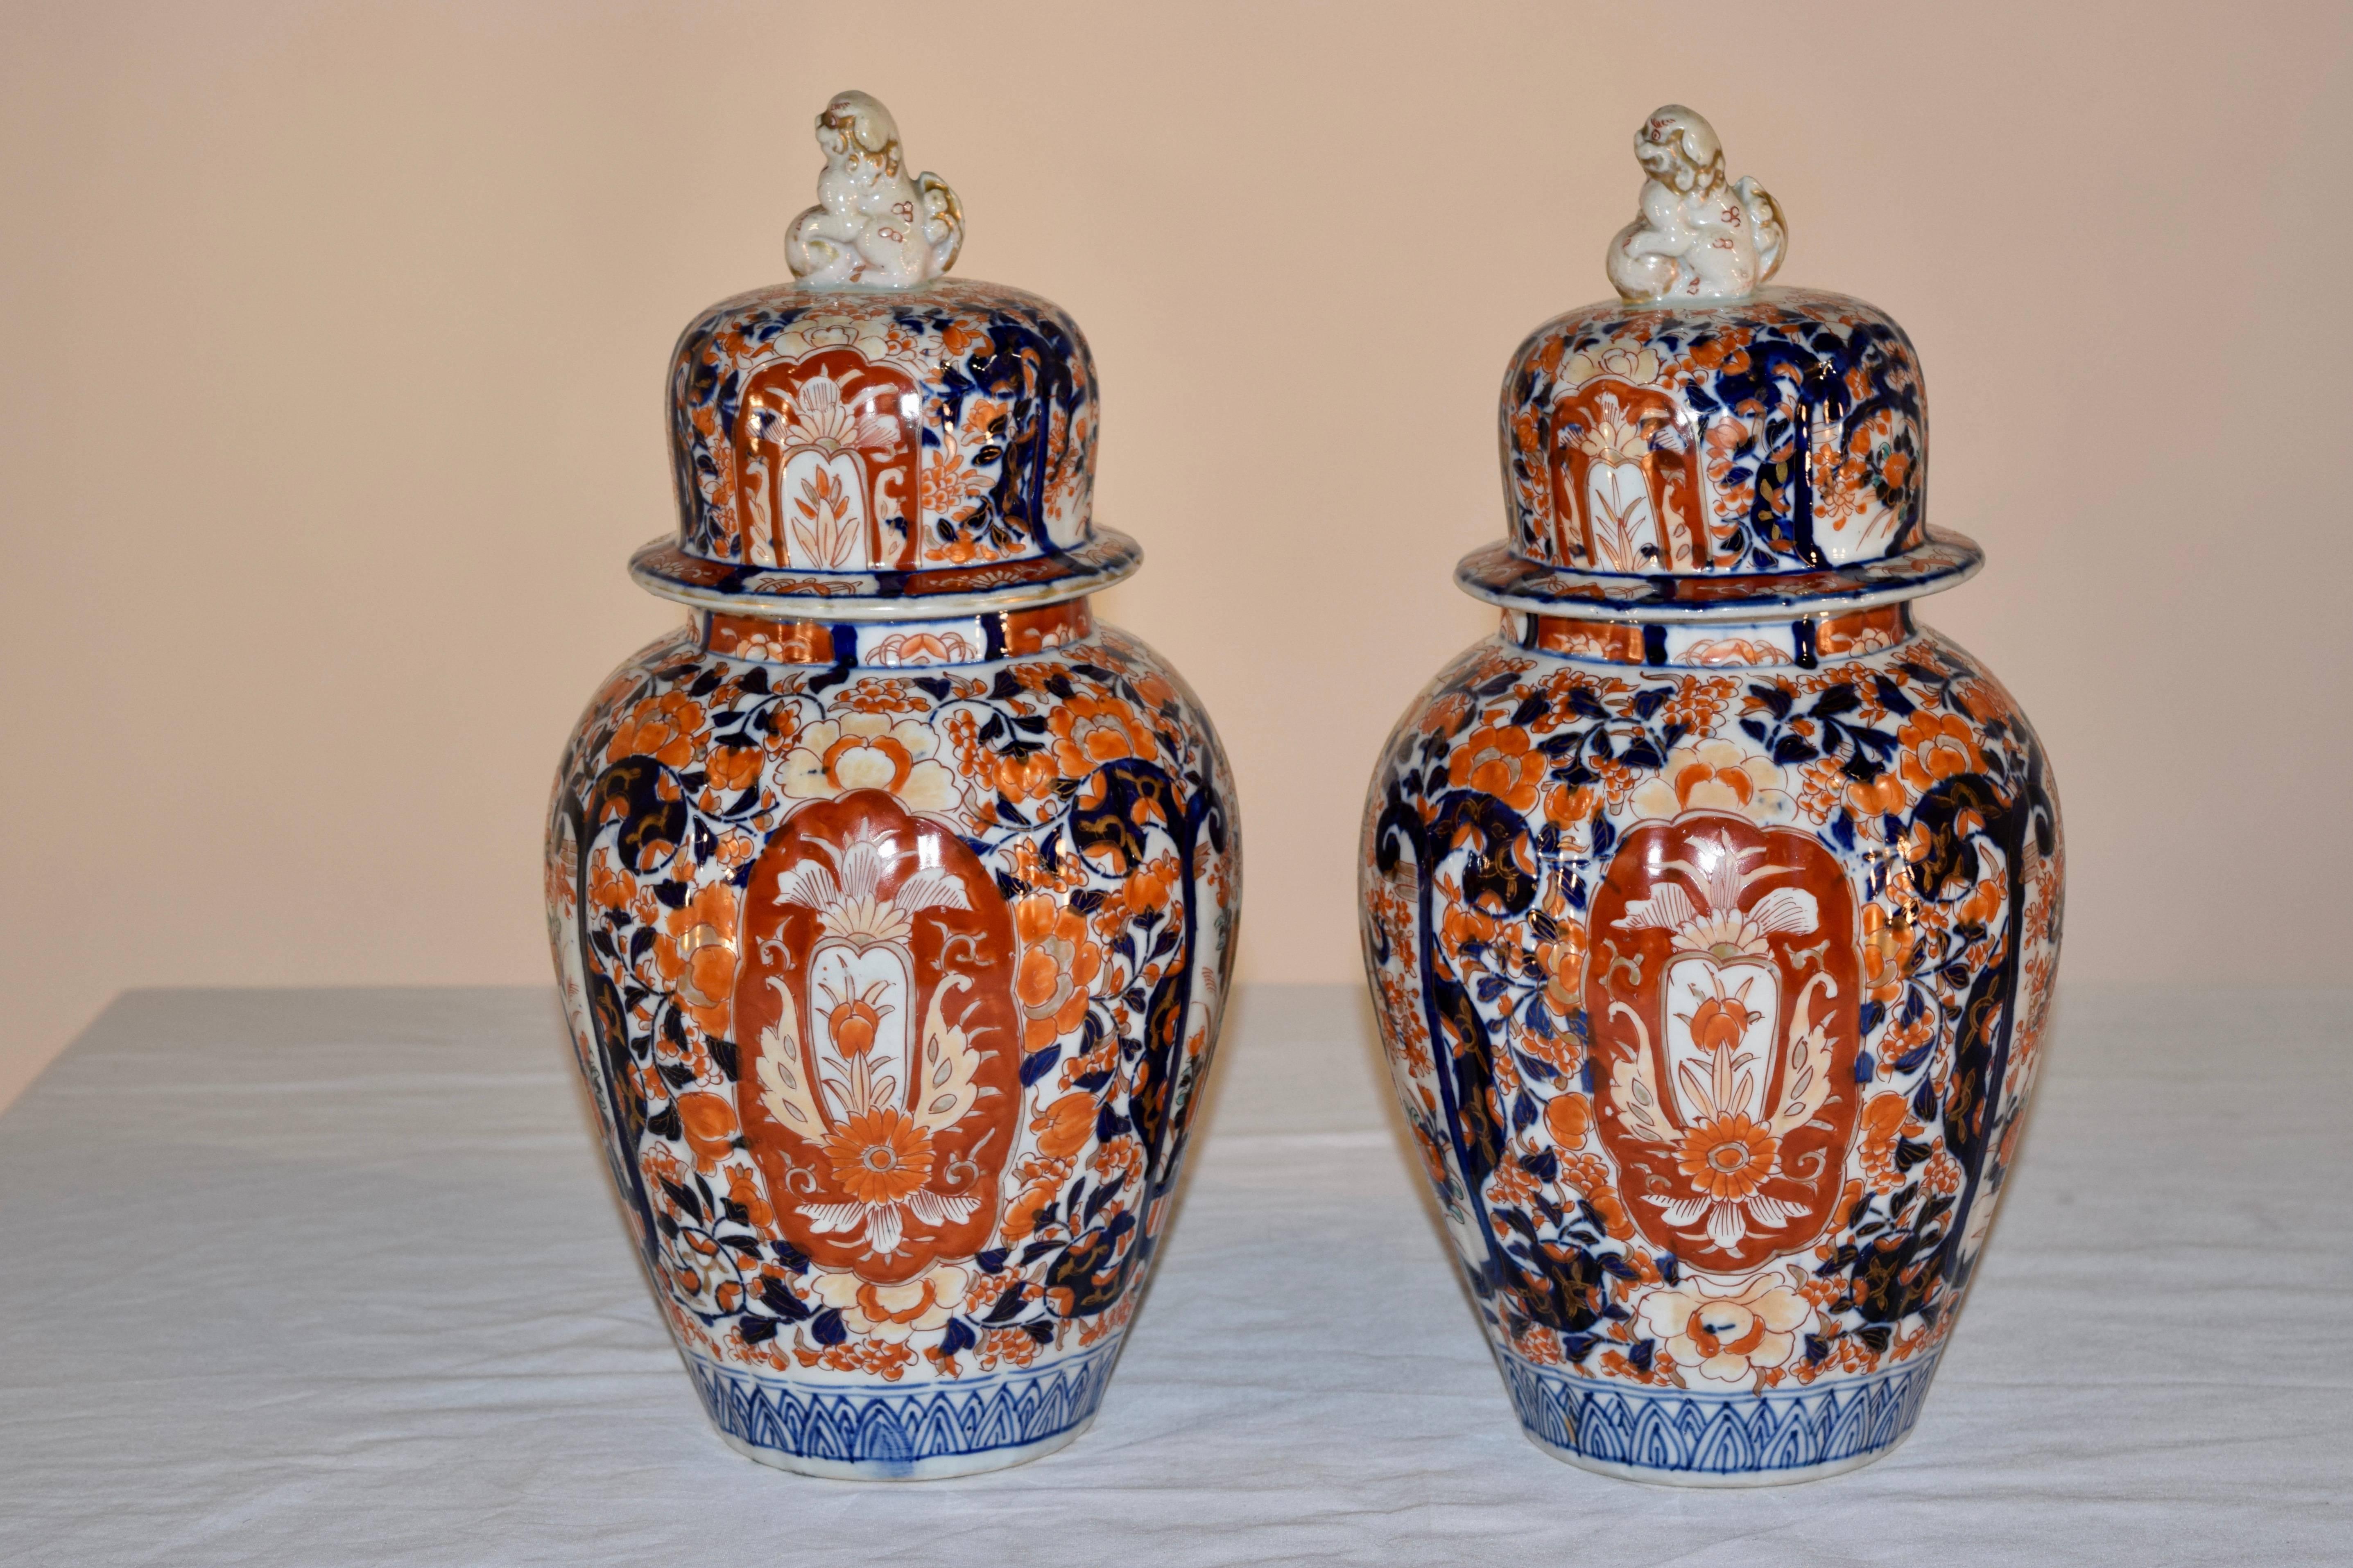 19th century pair of lidded Imari jars in gorgeous colors of cobalt, orange and gold. The hand-painted designs are of mostly florals and trees. They are in beautiful condition.